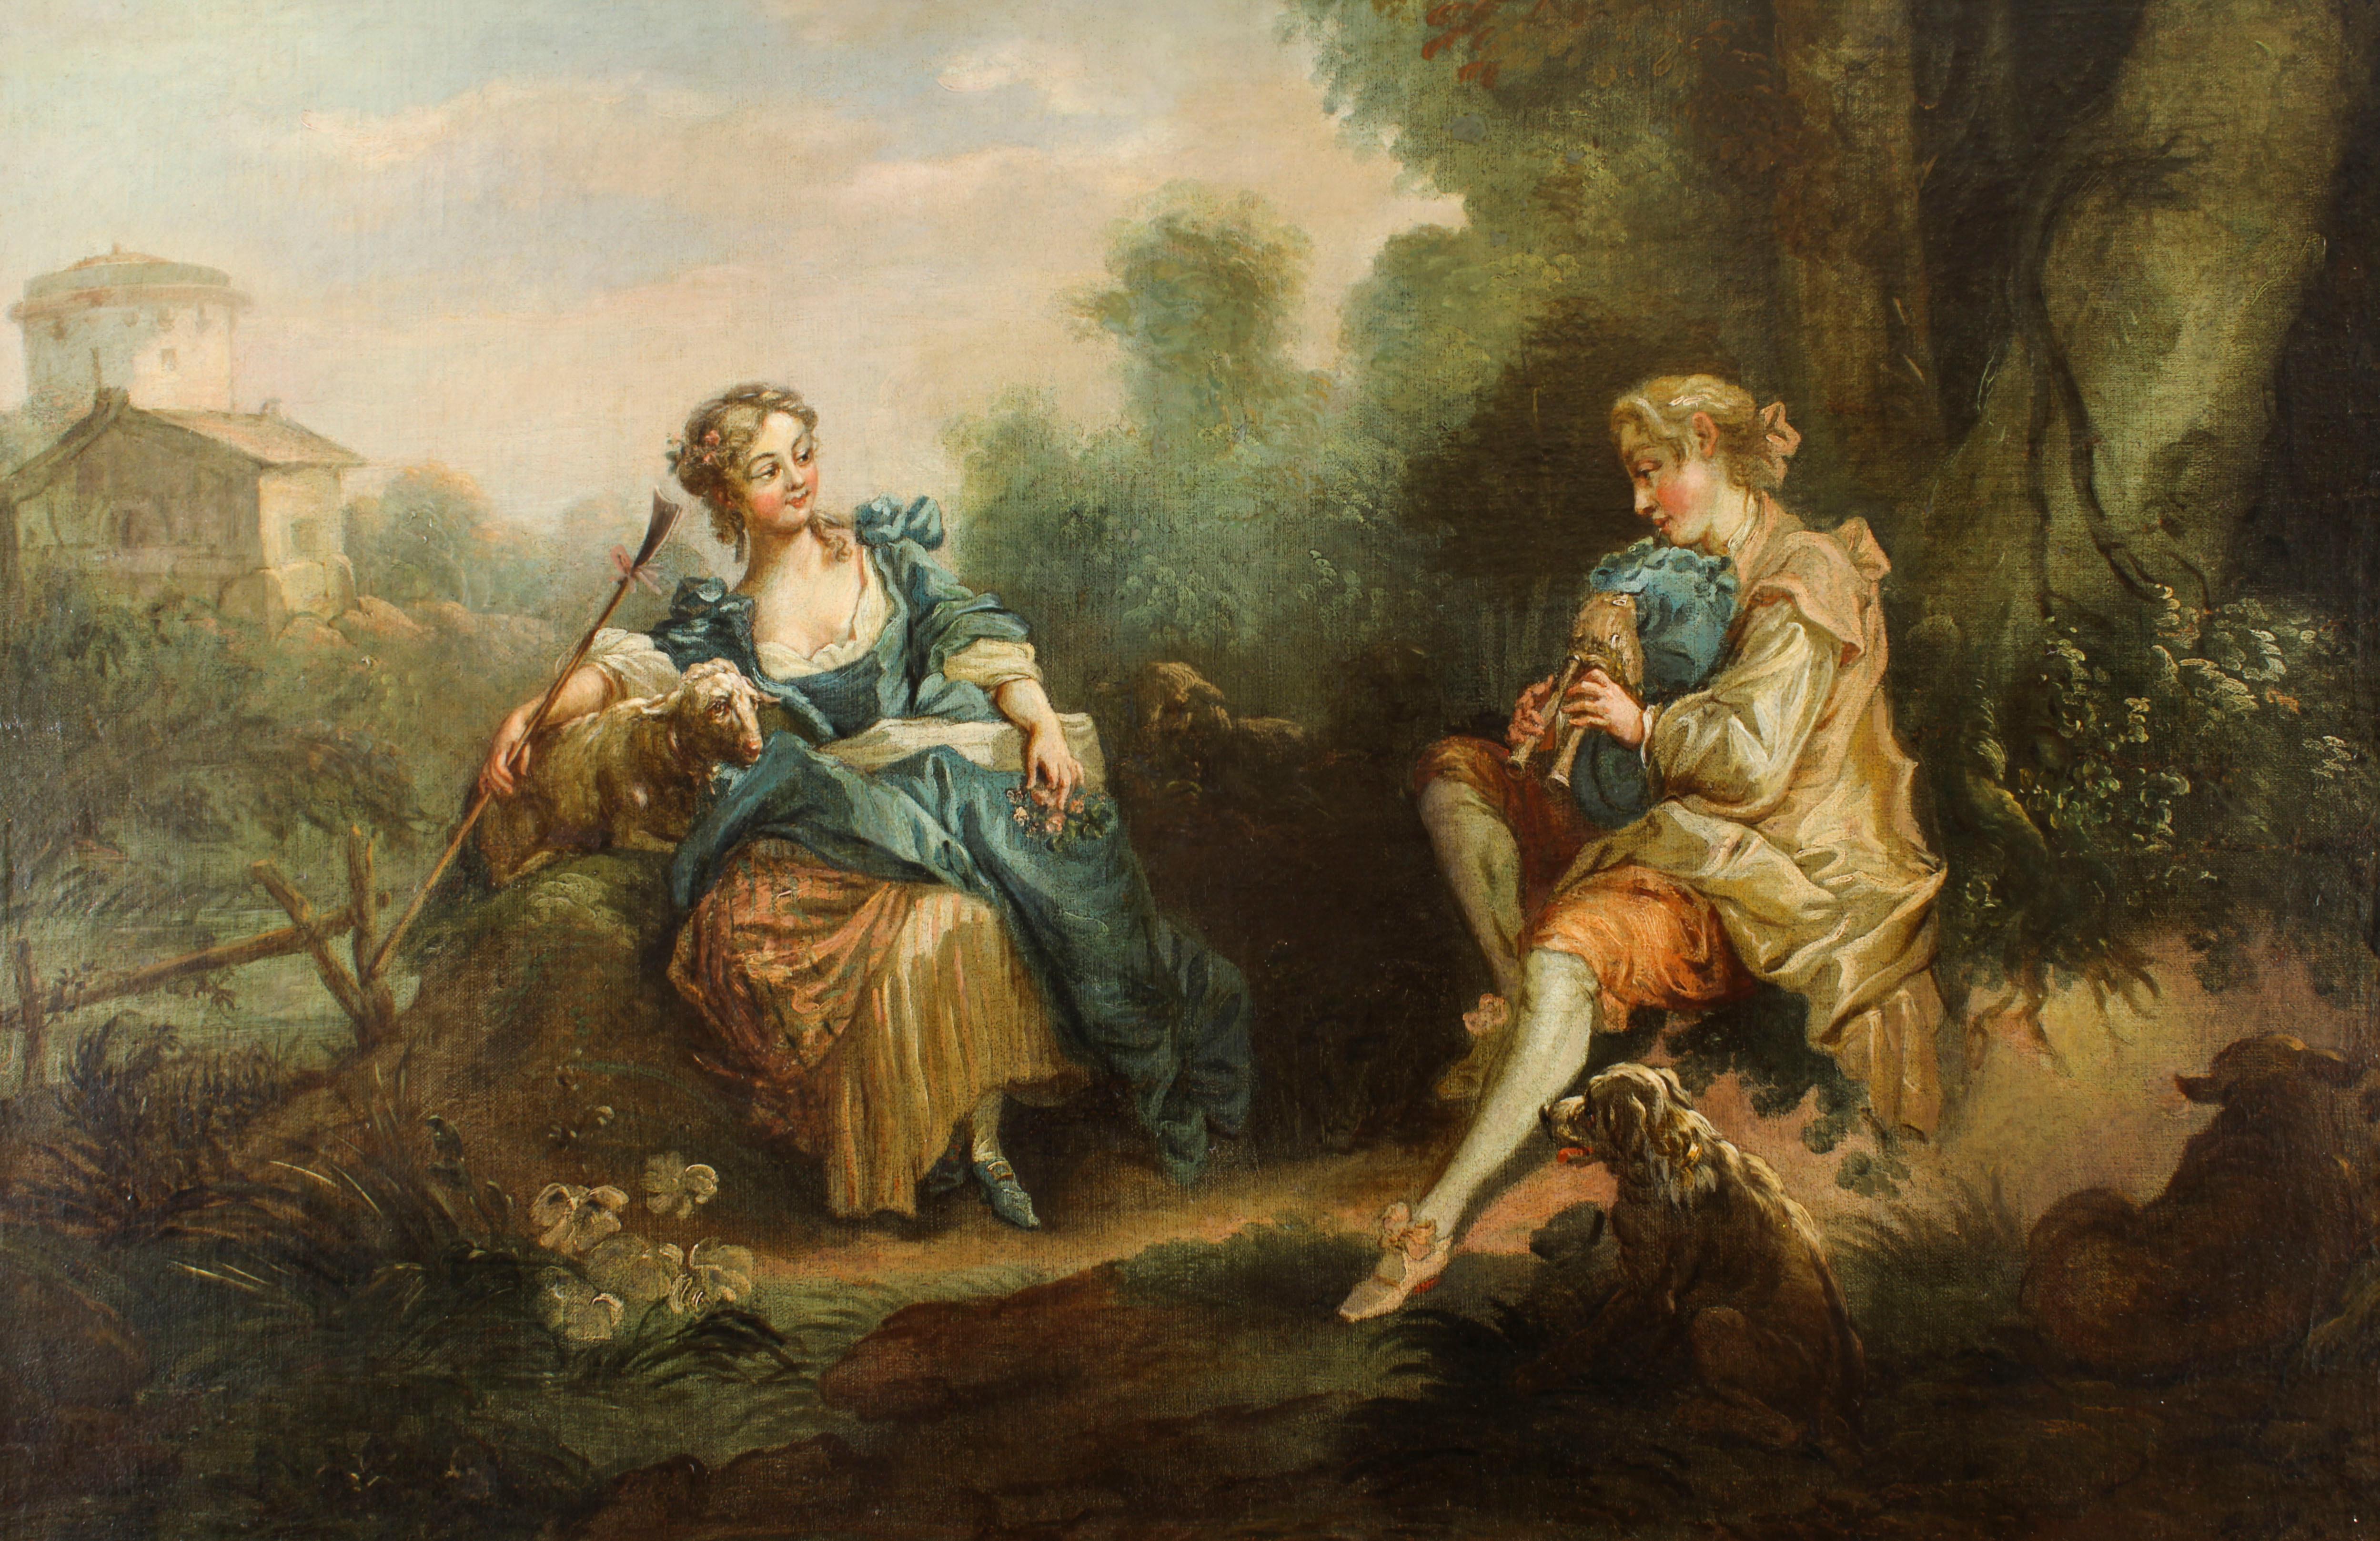 A beautiful French antique oil on canvas painting in the Manner of Jean-Antoine Watteau (1684-1721) 'The Serenade' dating from the early 19th century. 
 
The delightful subject of the painting is a courting couple in a rugged country landscape